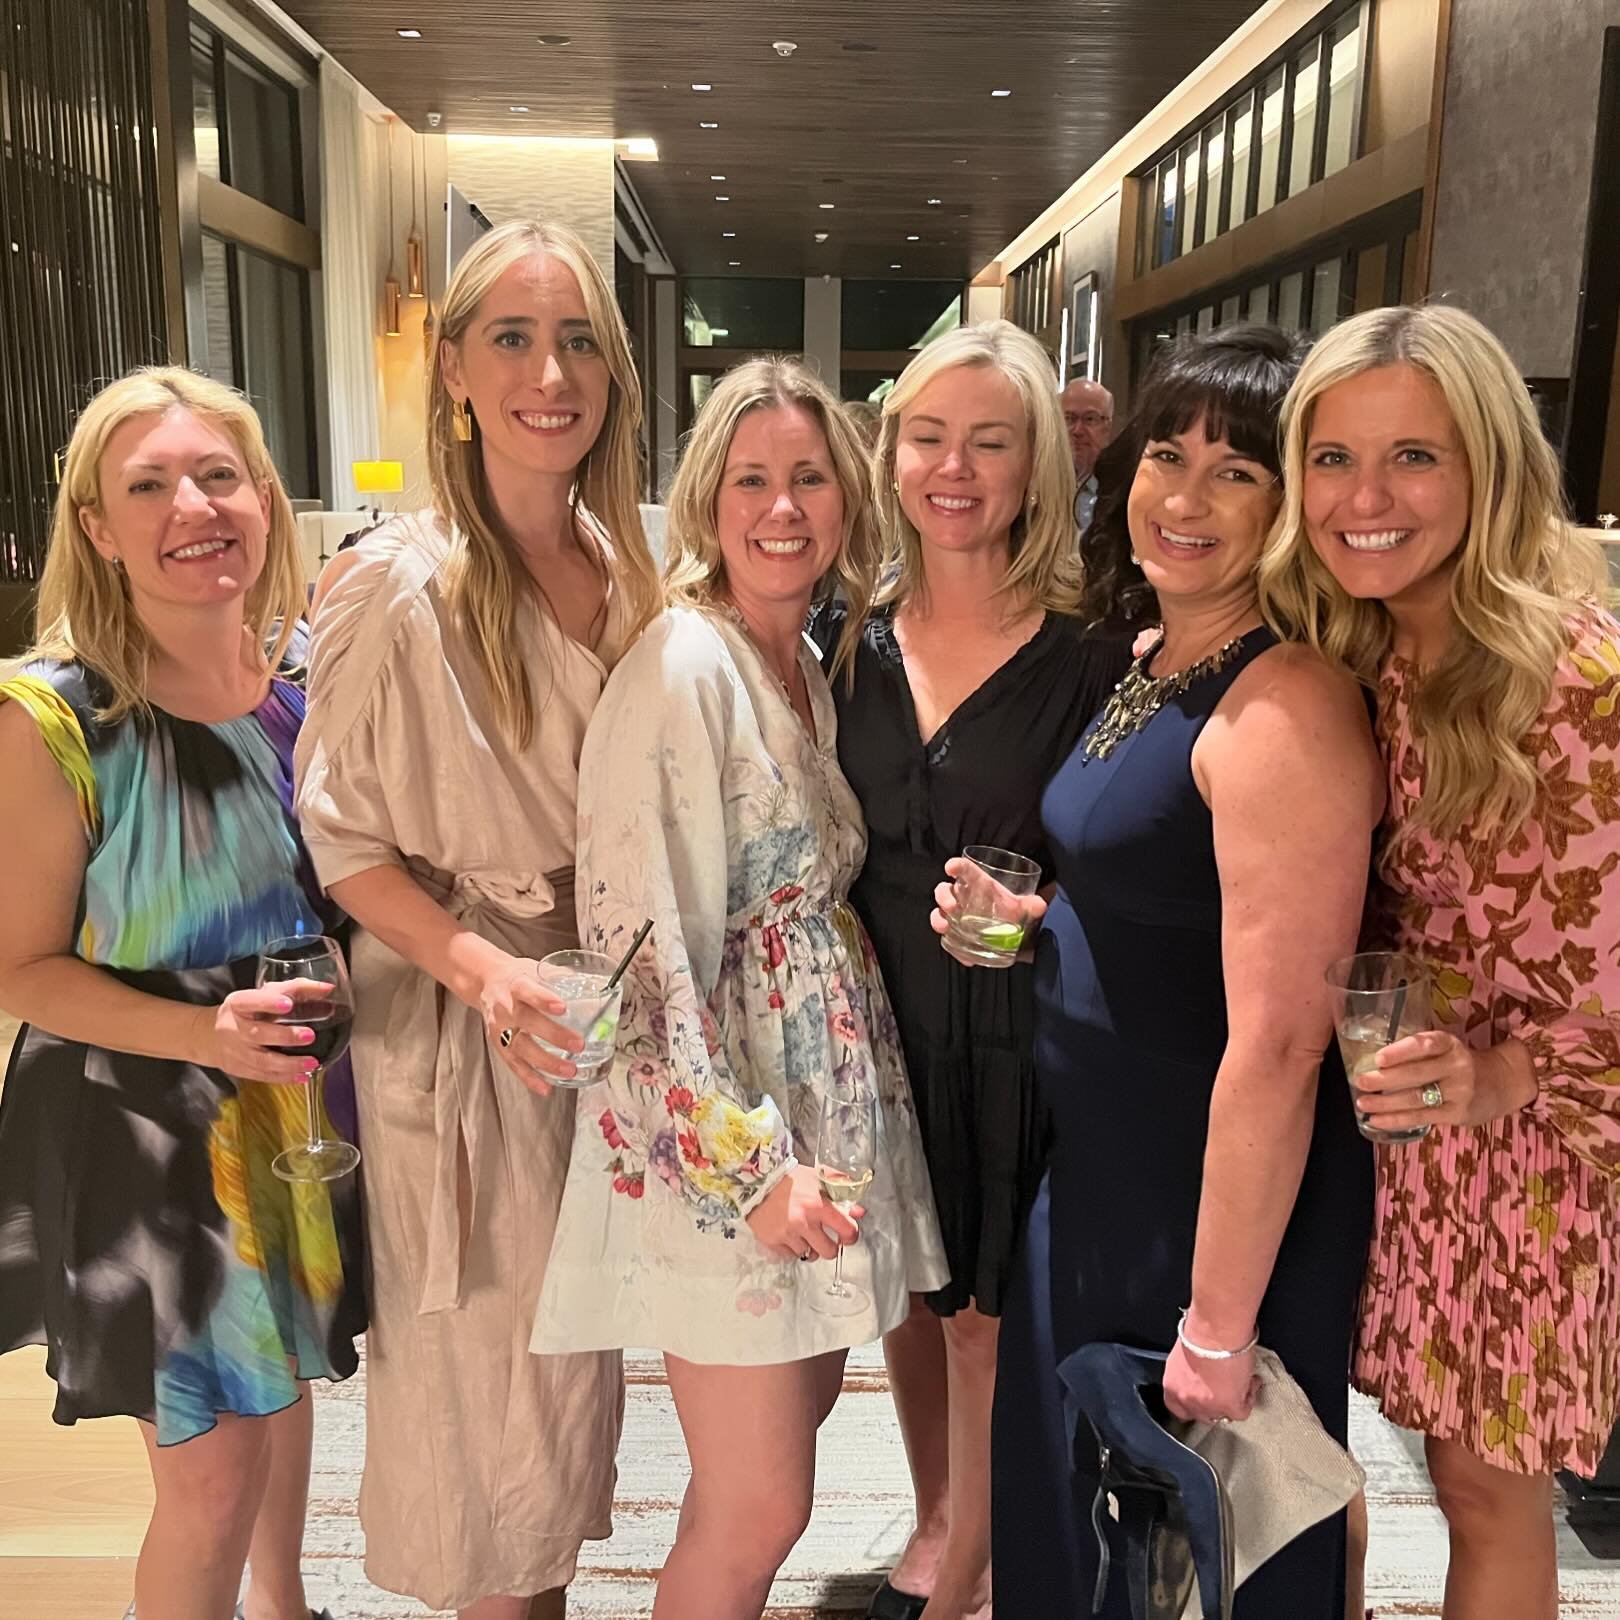 What a fantastic evening at aaha! 🎨🍷✨ This unique art, food, and wine event not only delighted our senses but also supported a wonderful cause &ndash; raising funds for Hospice of the Valley AZ. Cheers to making a difference! 🥂💖 @hospiceofthevall